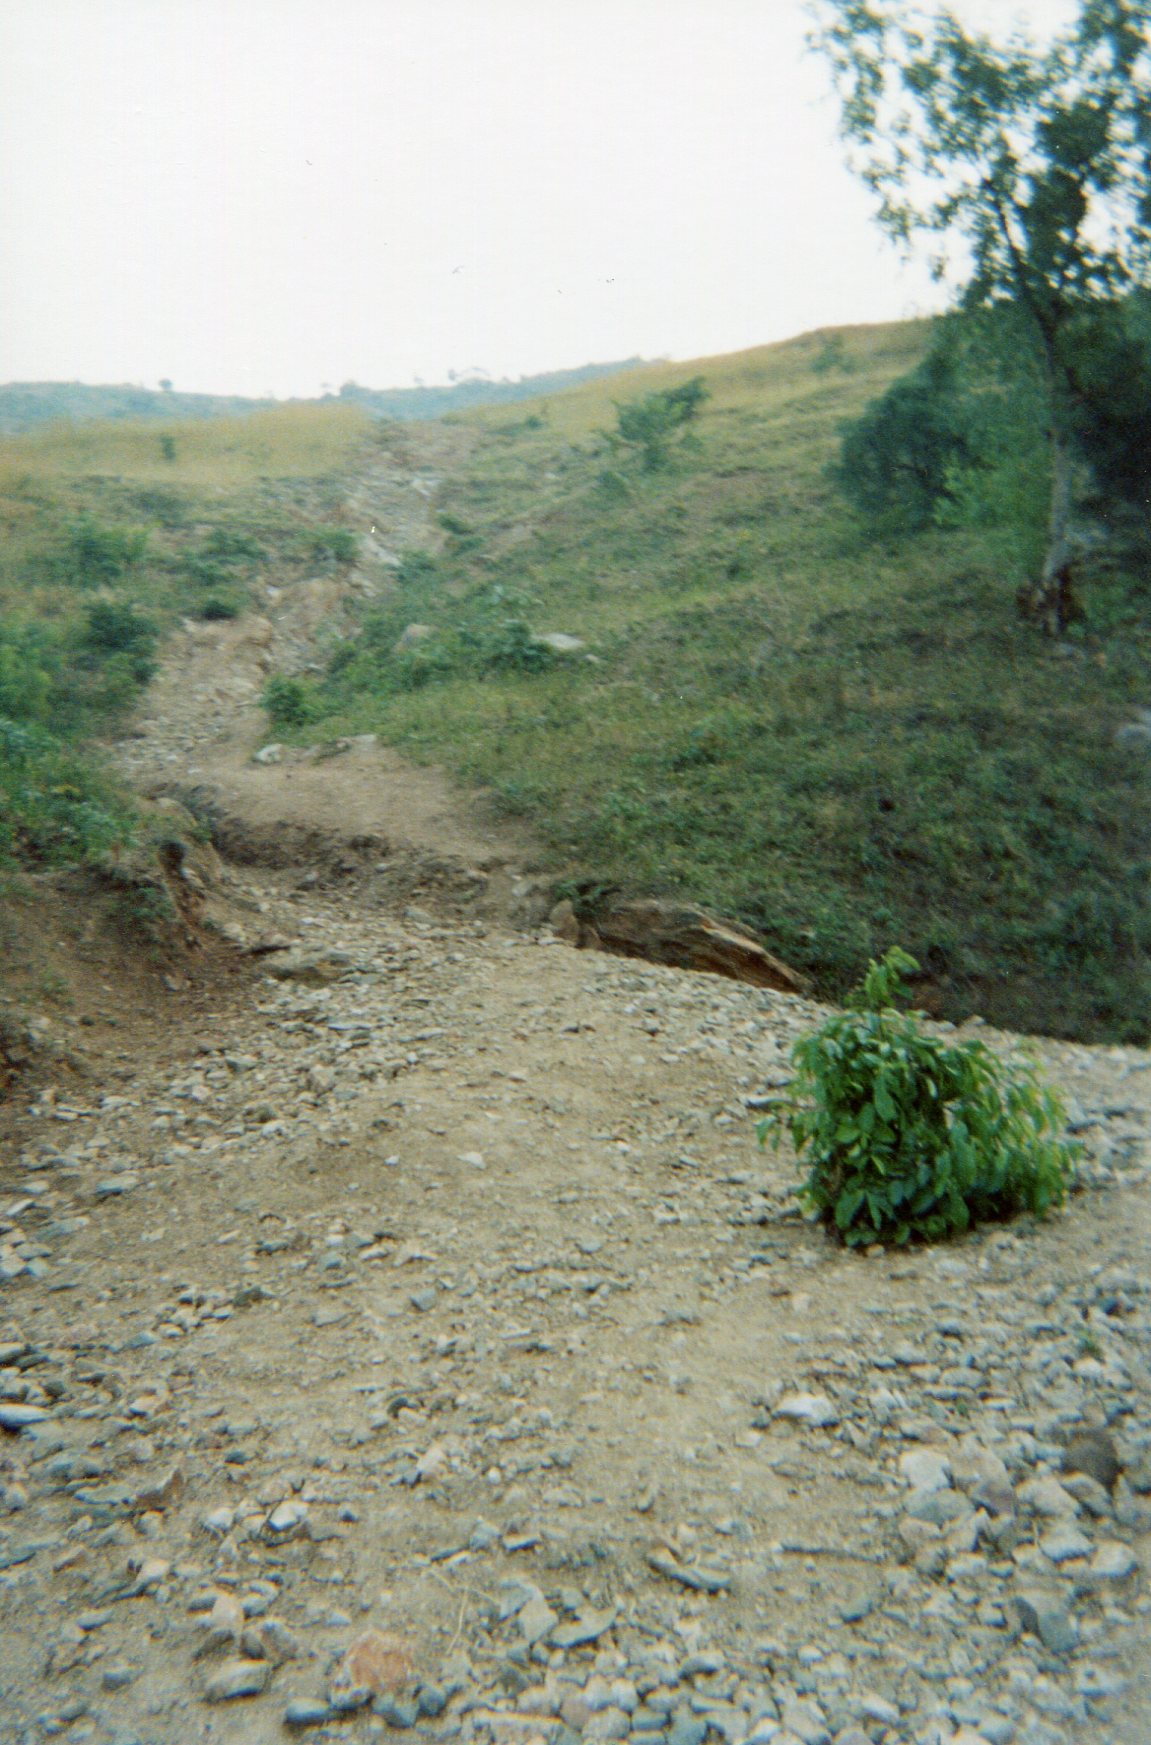  This shows the road where the children passed before joining the camp for the armed groups.&nbsp; 